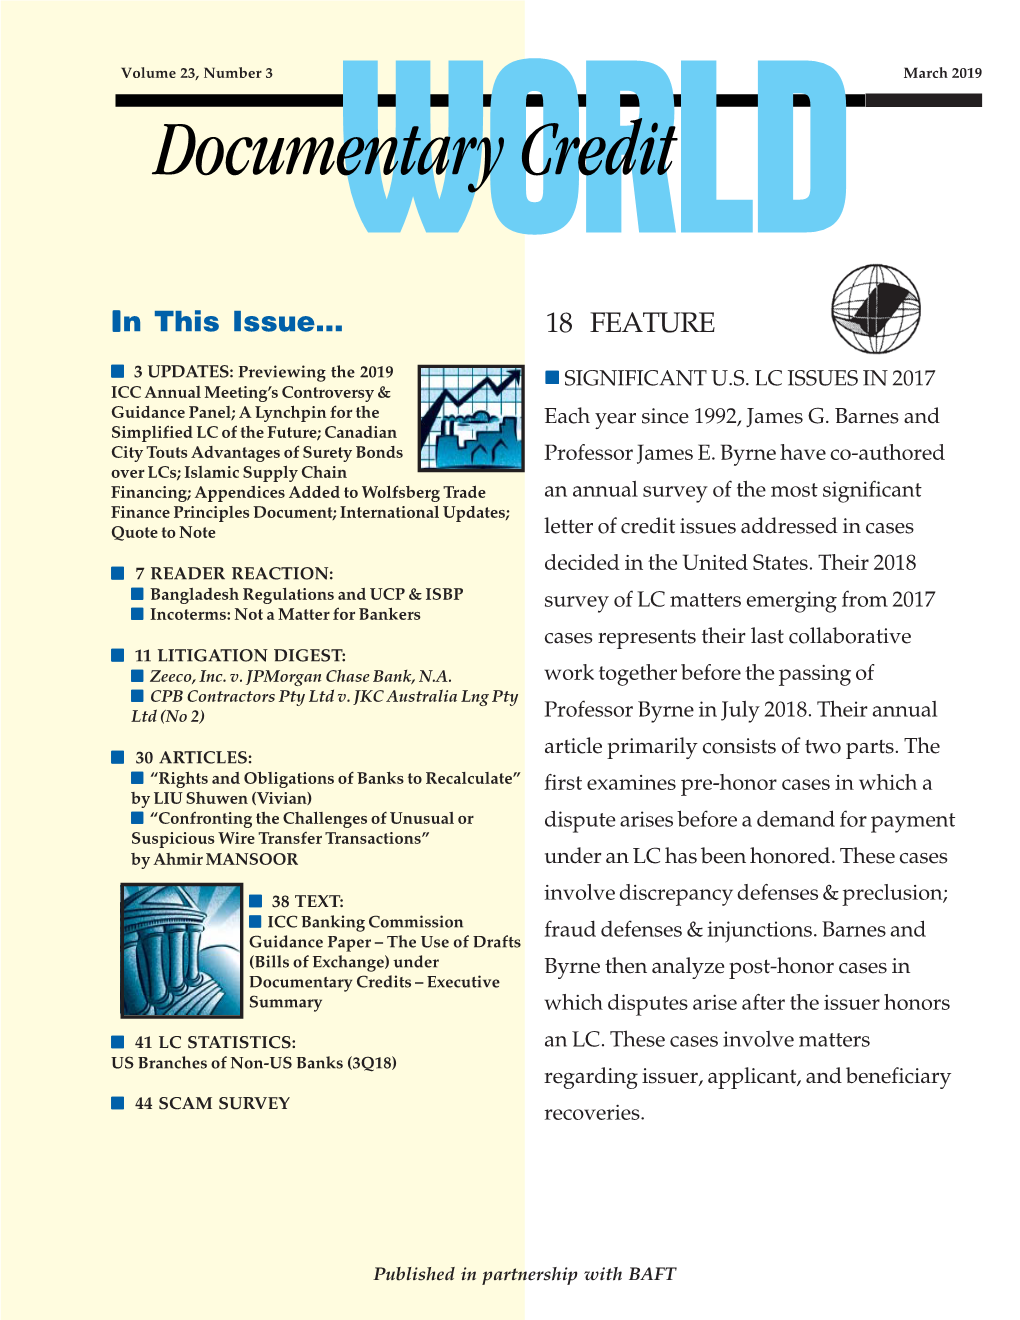 Mar 2019 DCW Issue.Pmd